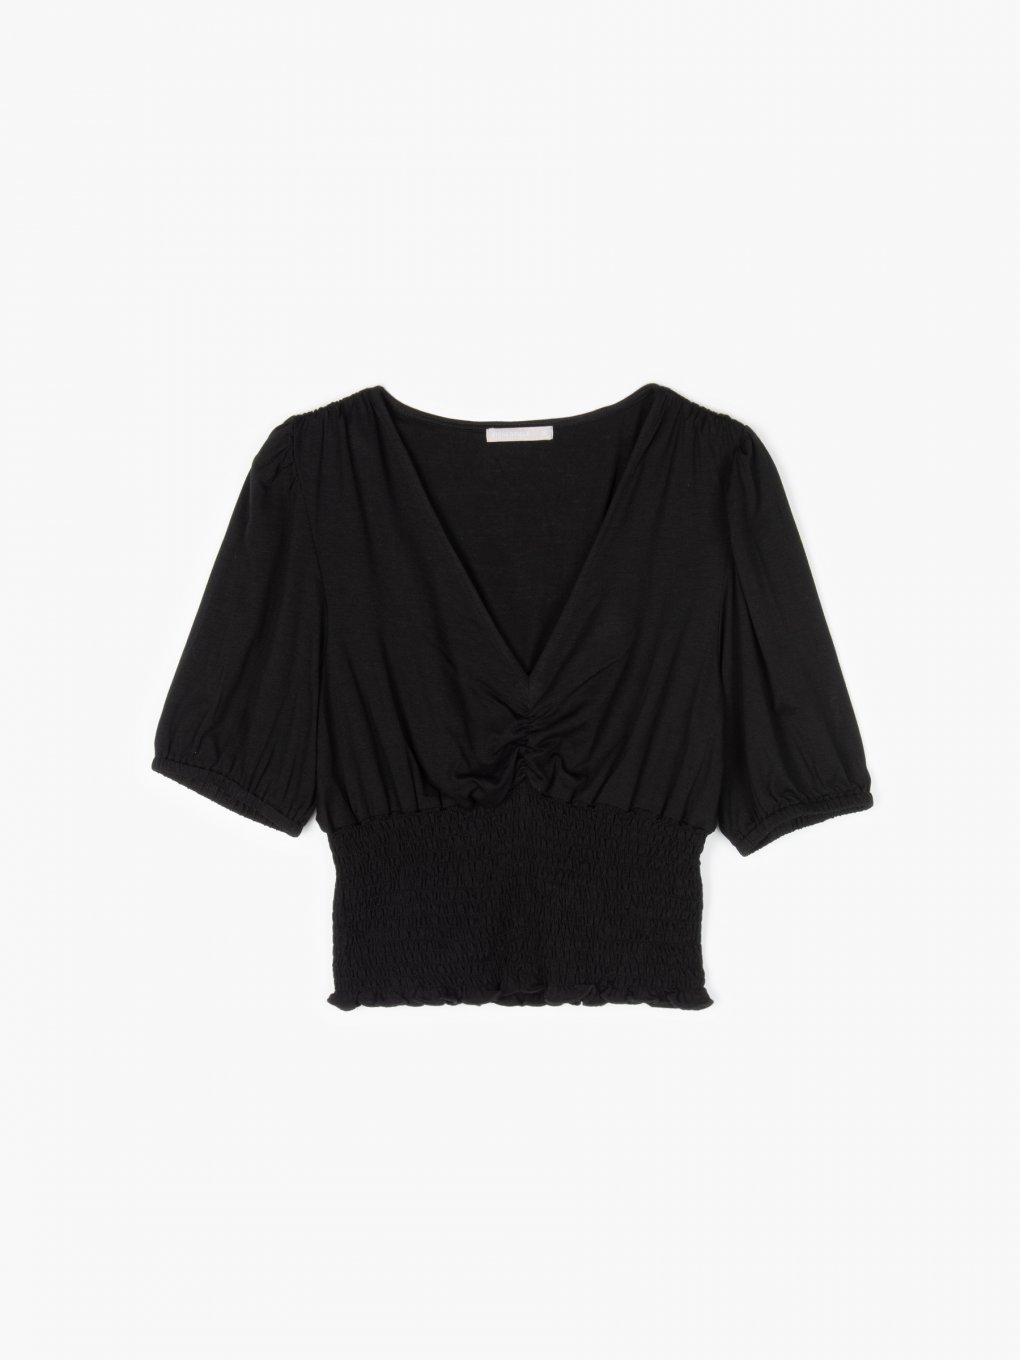 Viscose crop top with ruffle